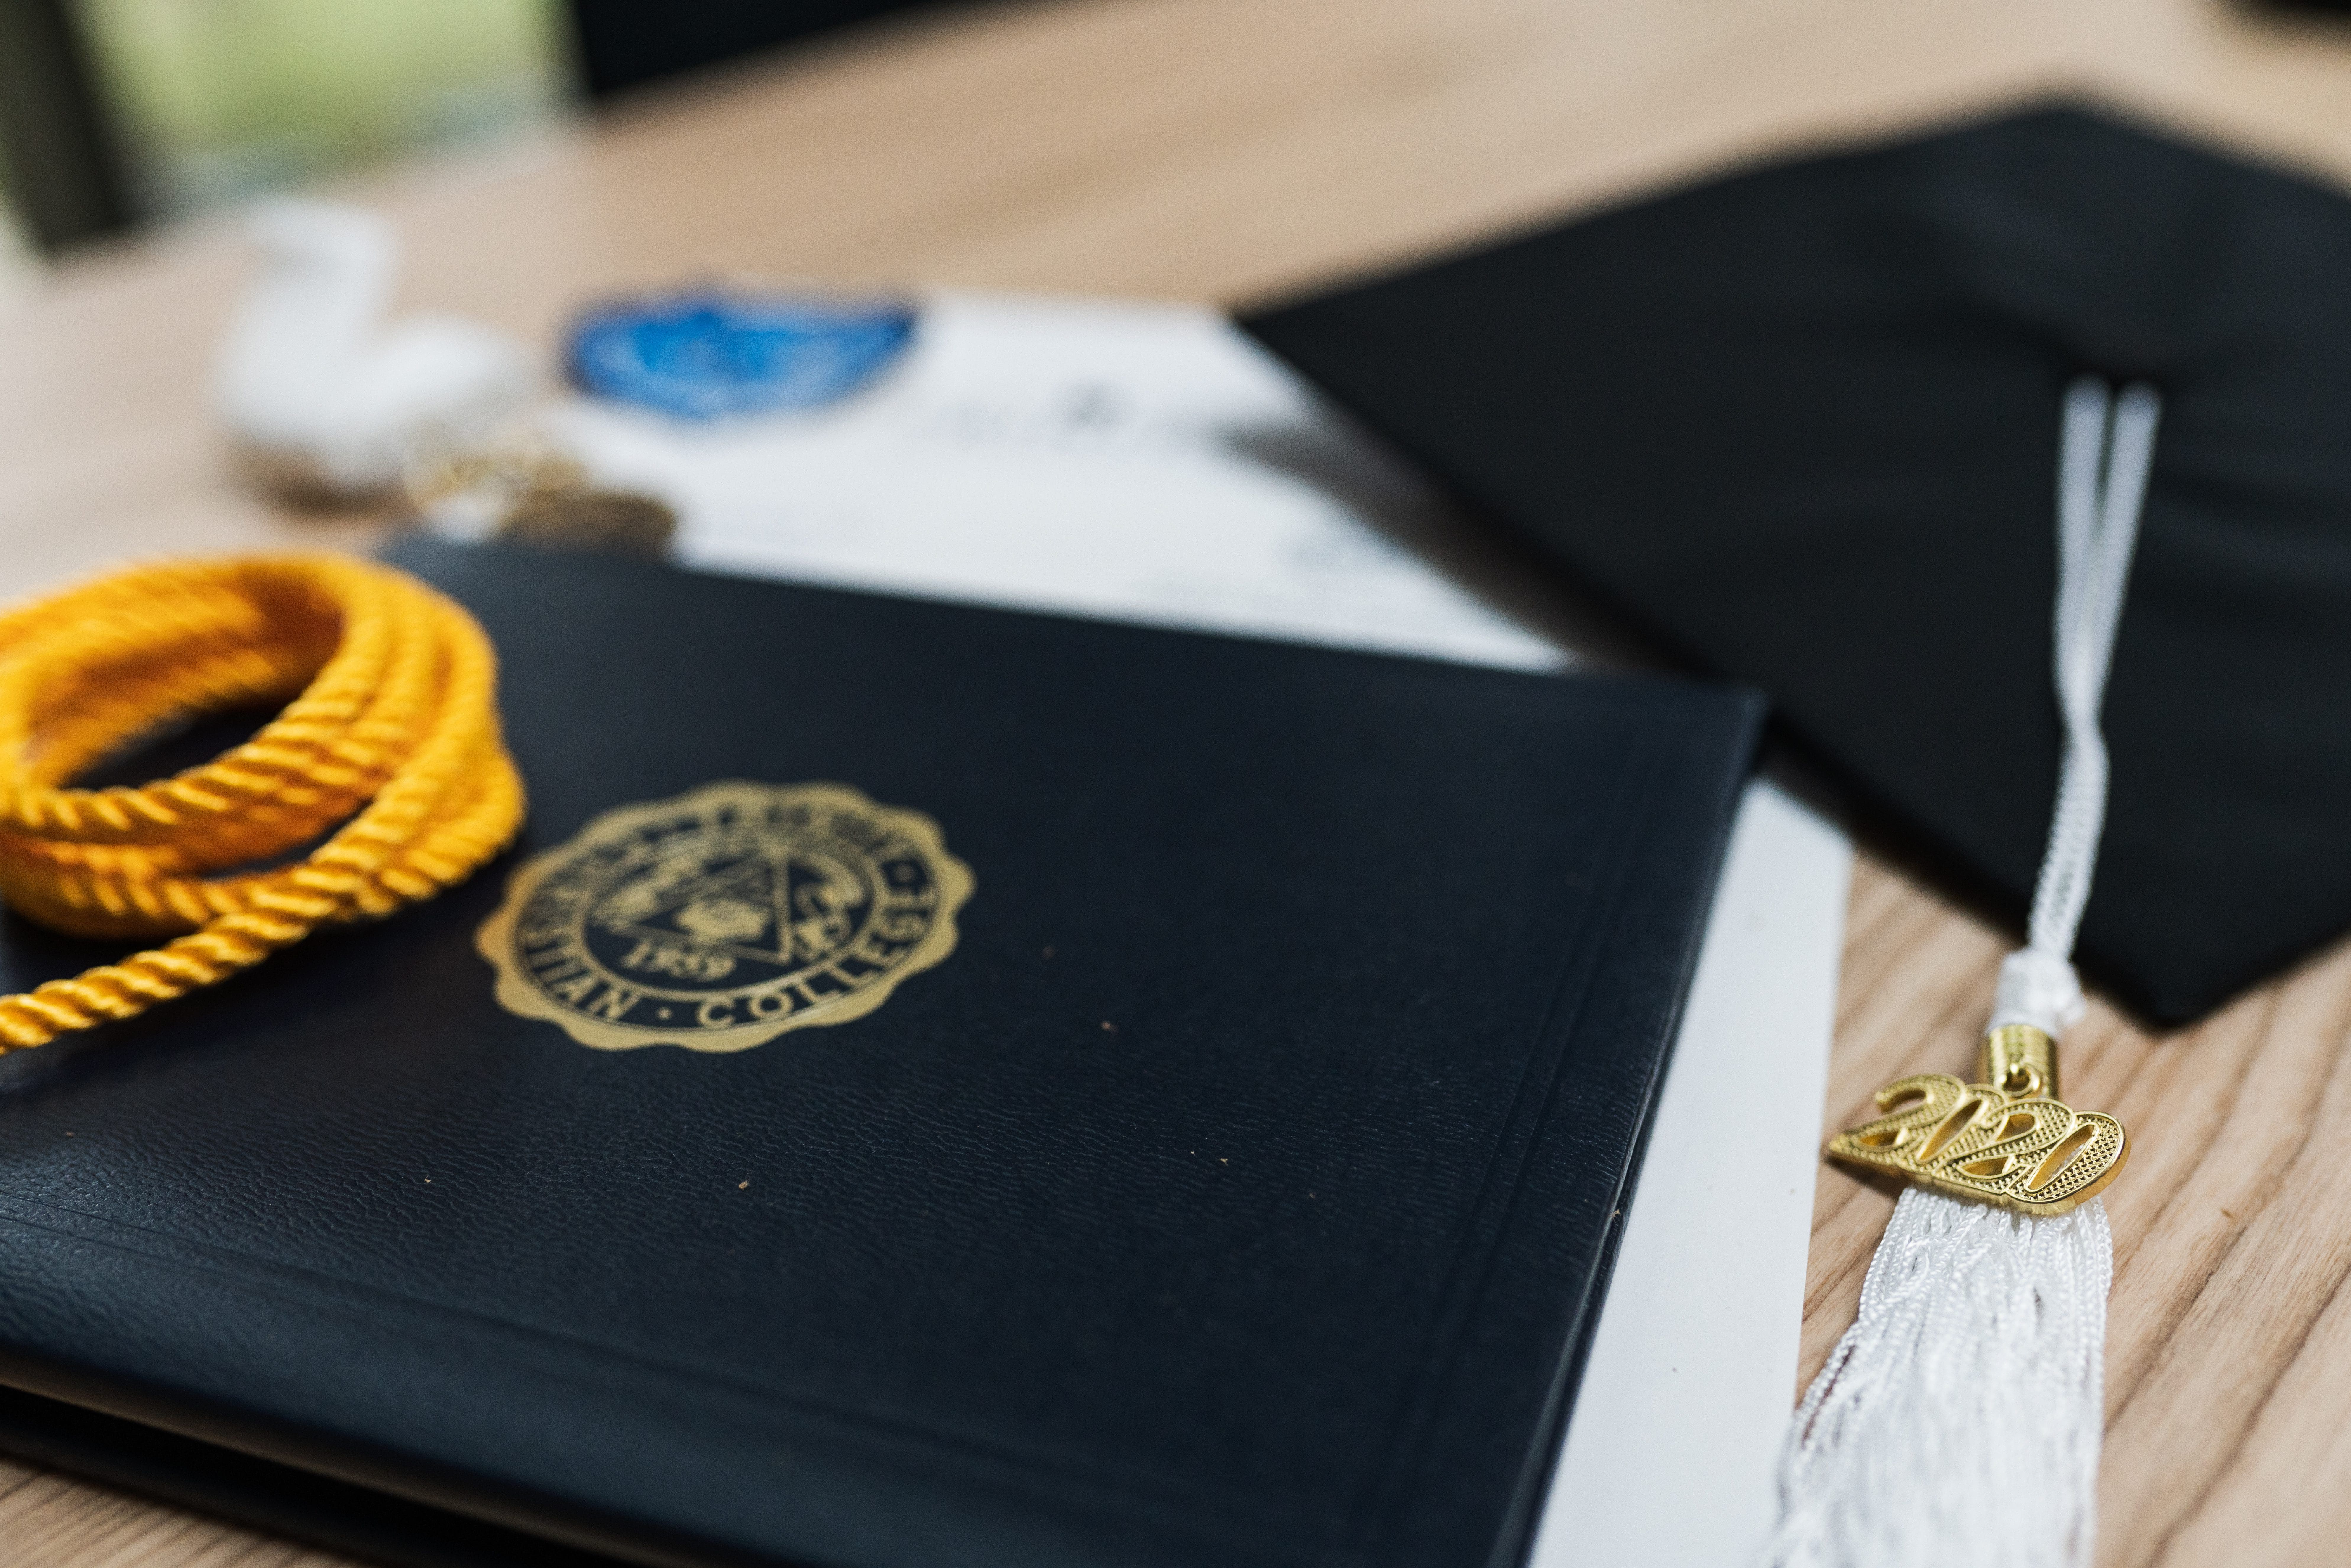 Graduation Packages: diploma, cap, and tassel